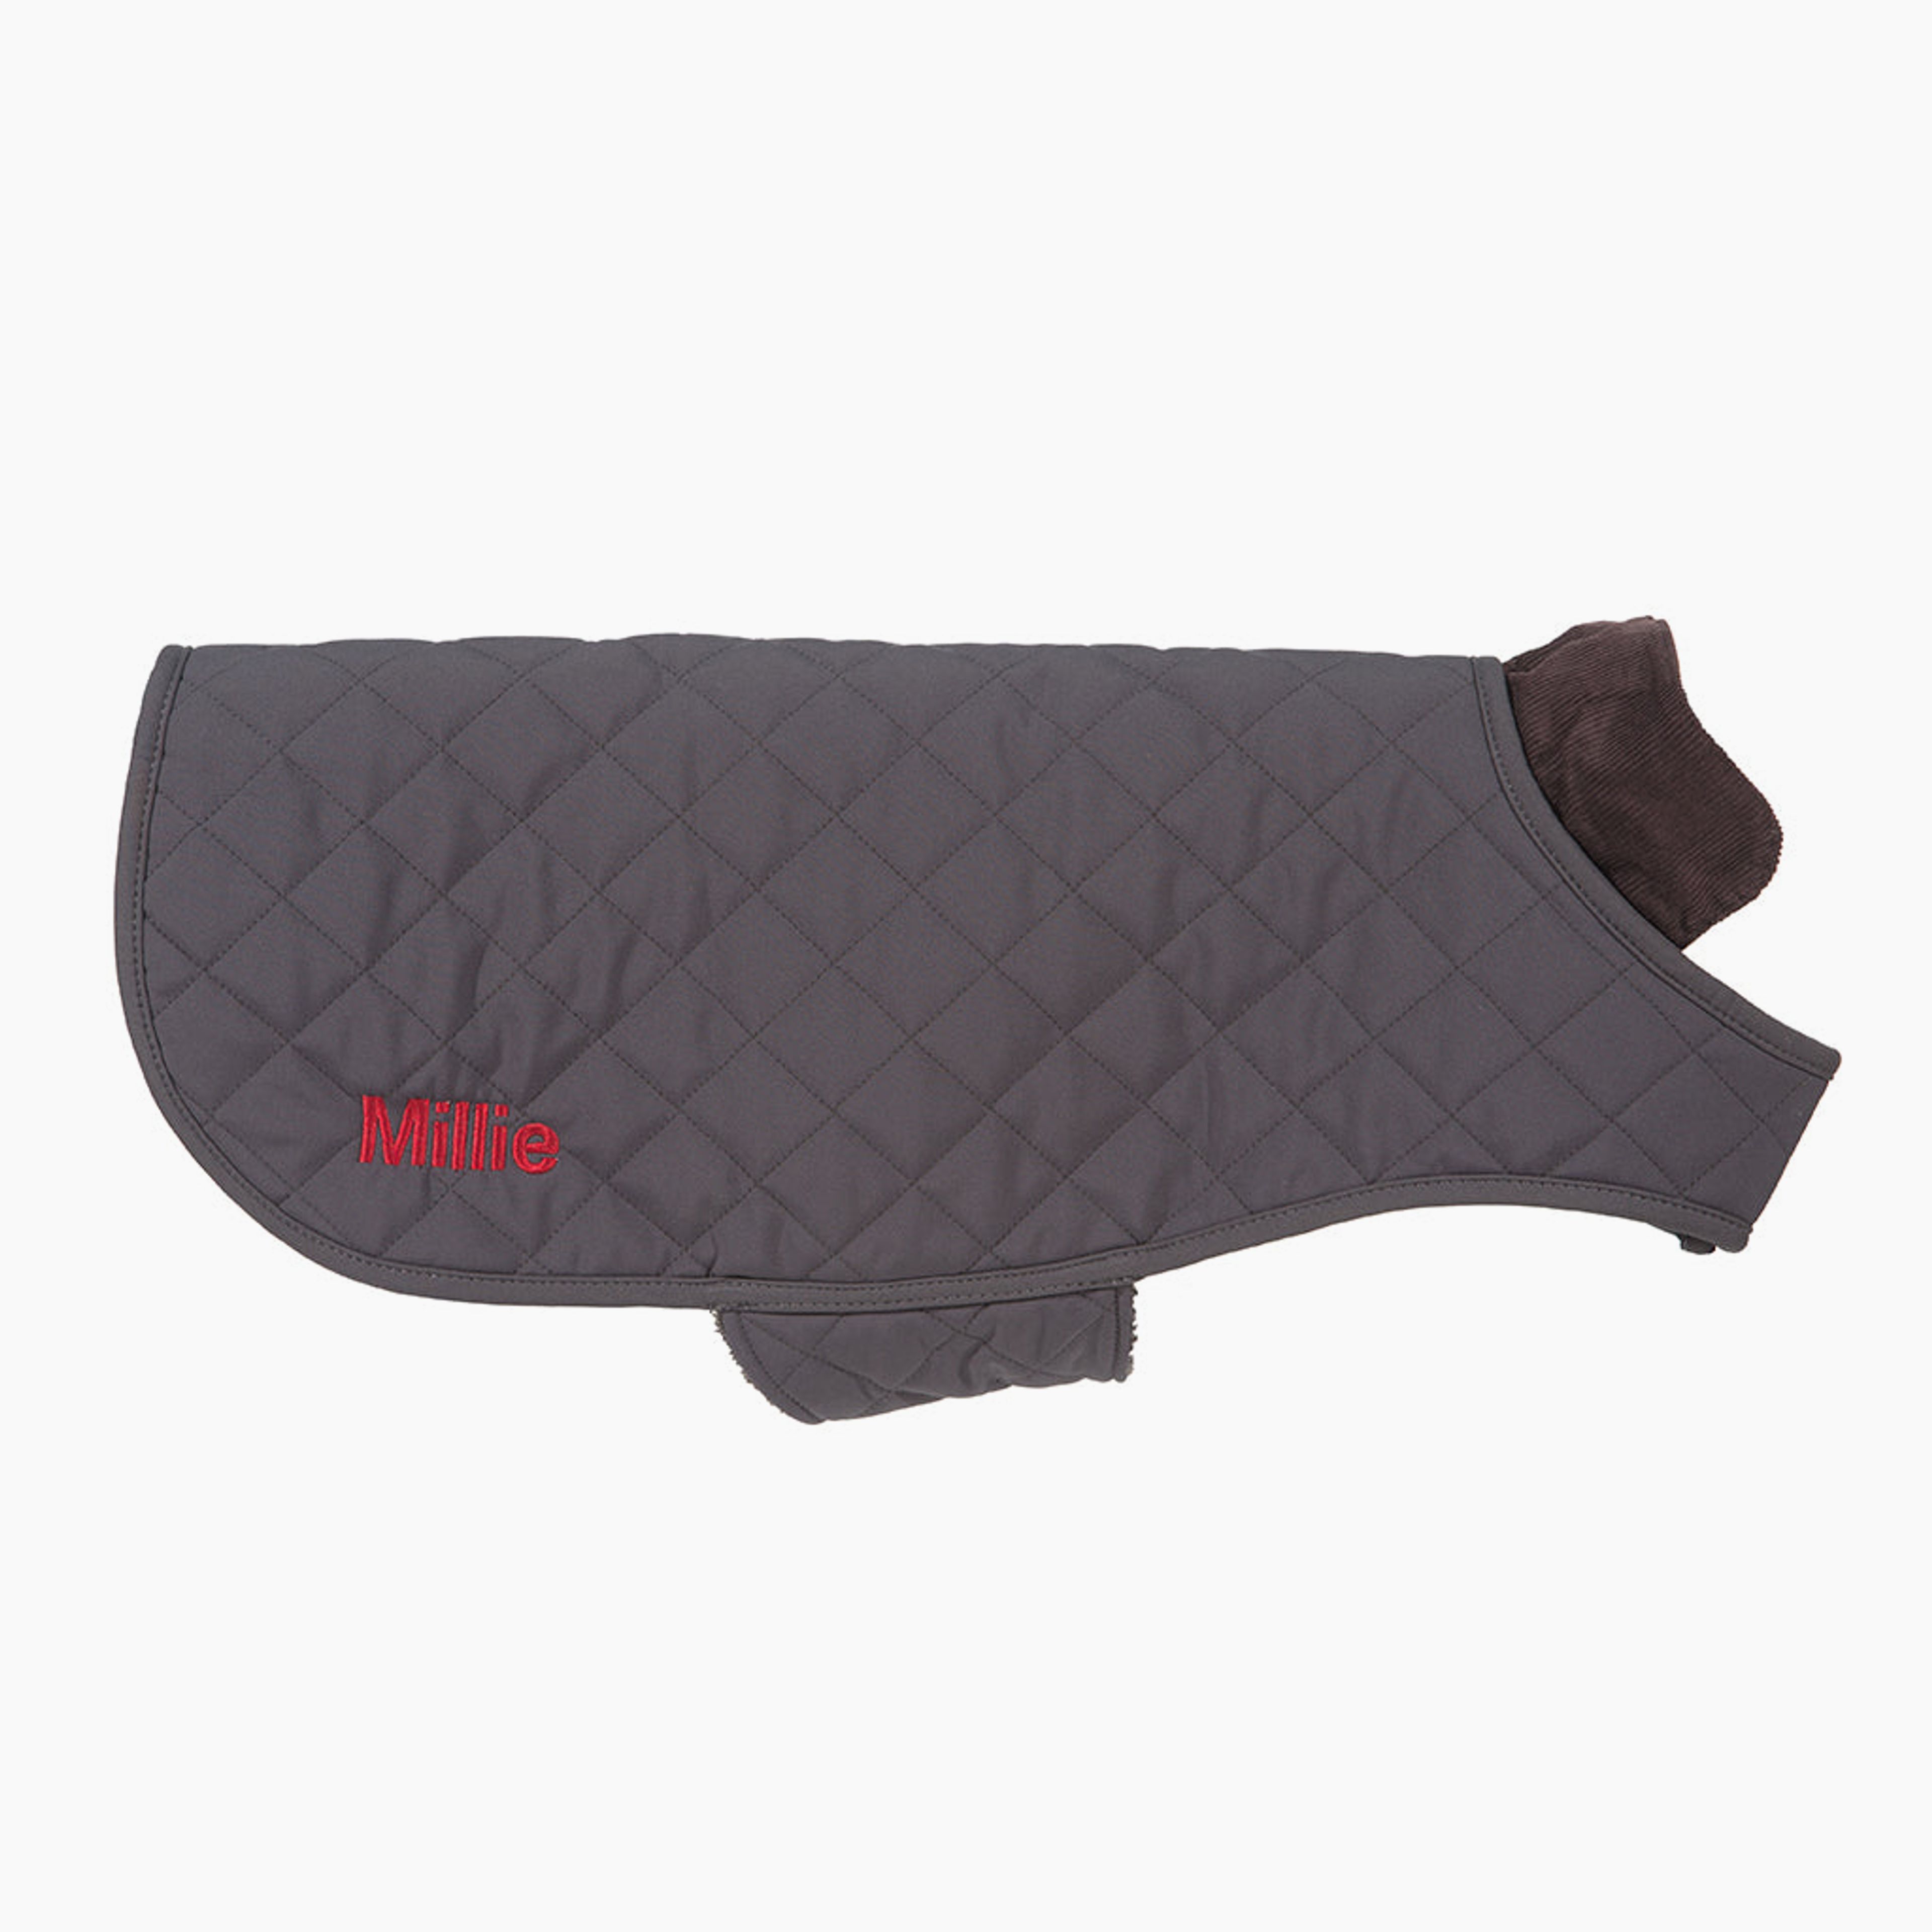 Weatherproof Quilted Dog Jacket, Free Personalization